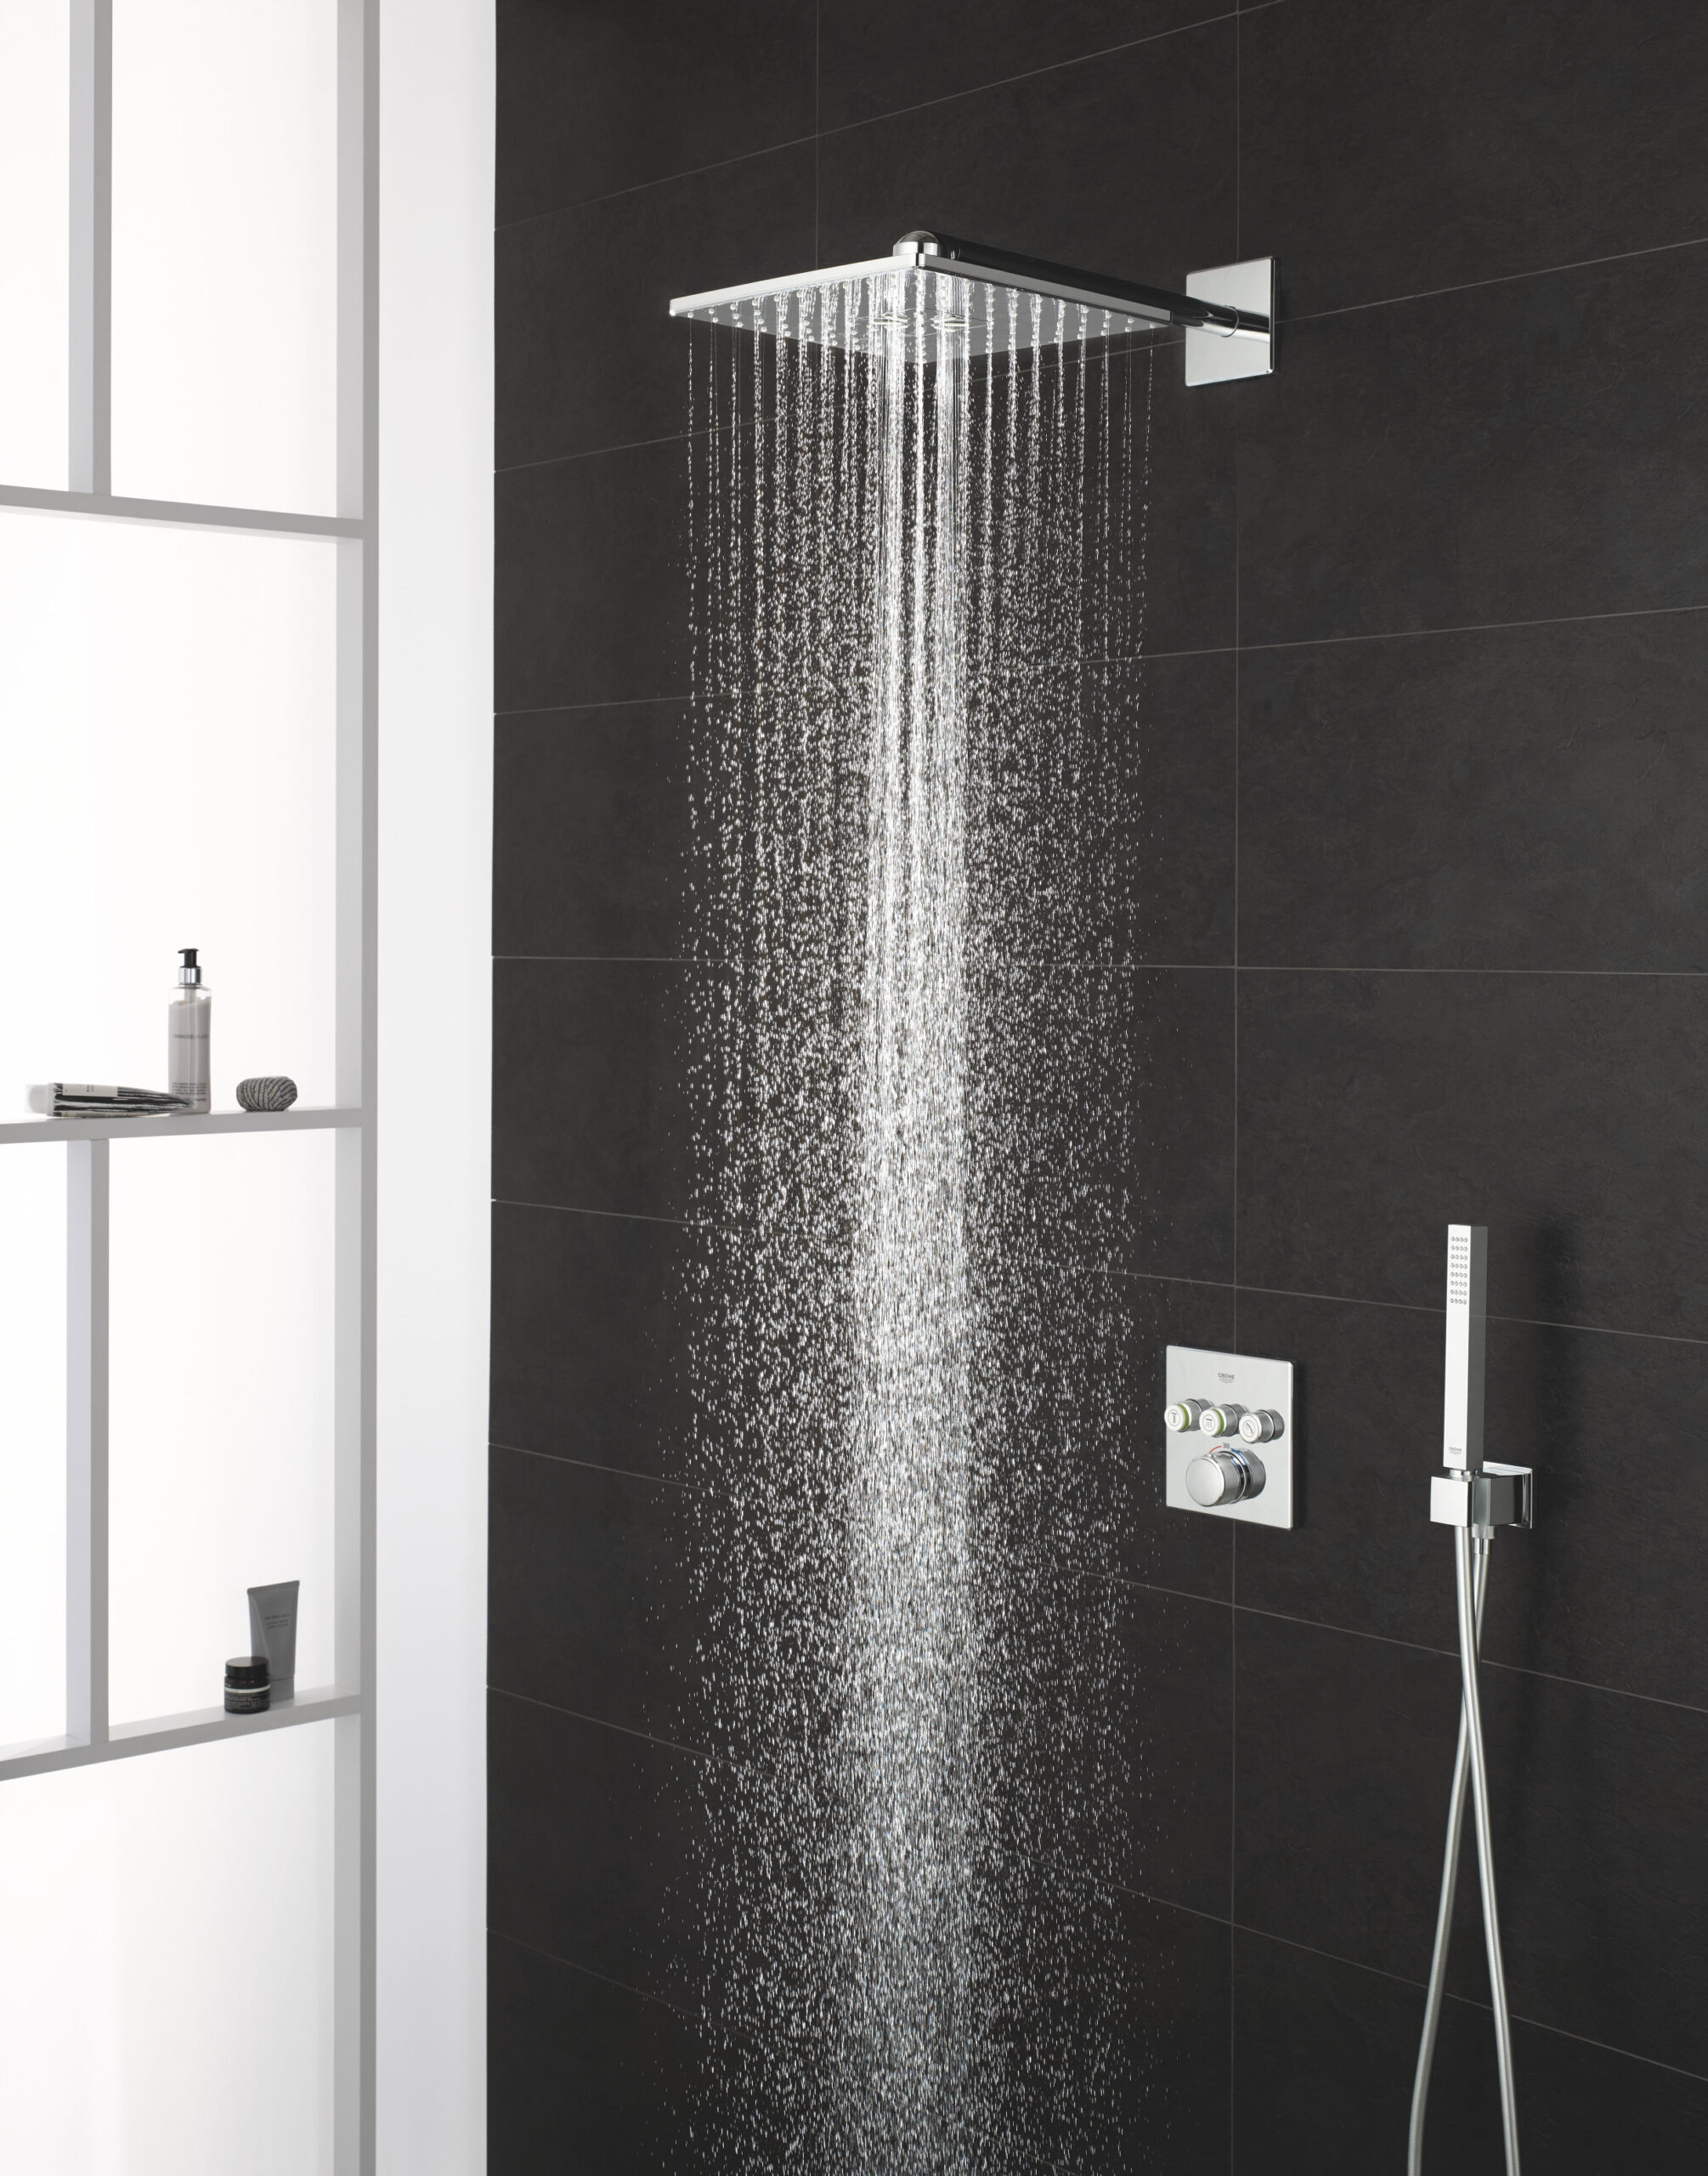 New market research from GROHE reveals British showering behaviours and consumer attitudes towards their bathroom @GroheUK